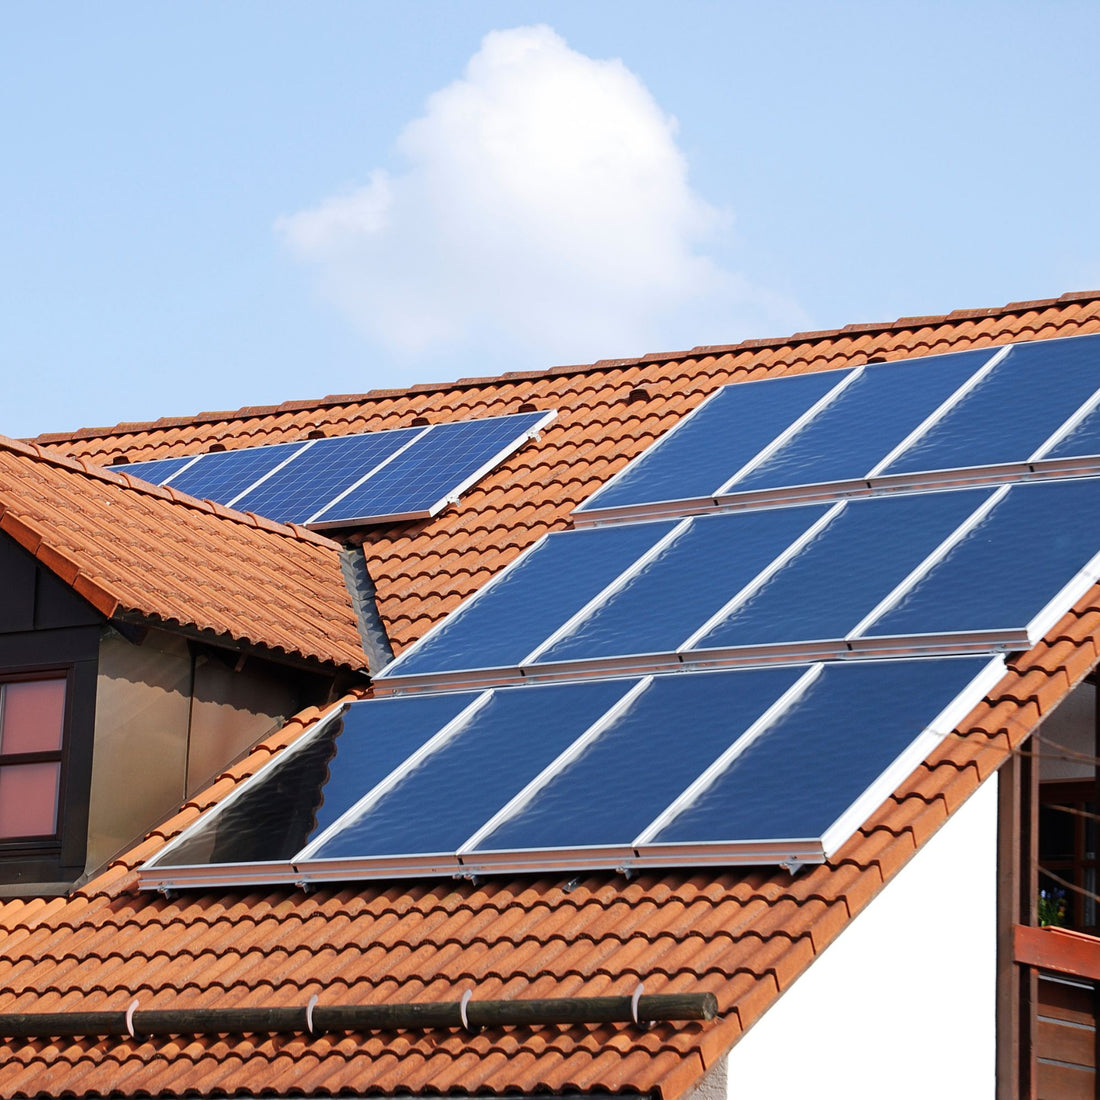 How big solar system do you need to power a house?